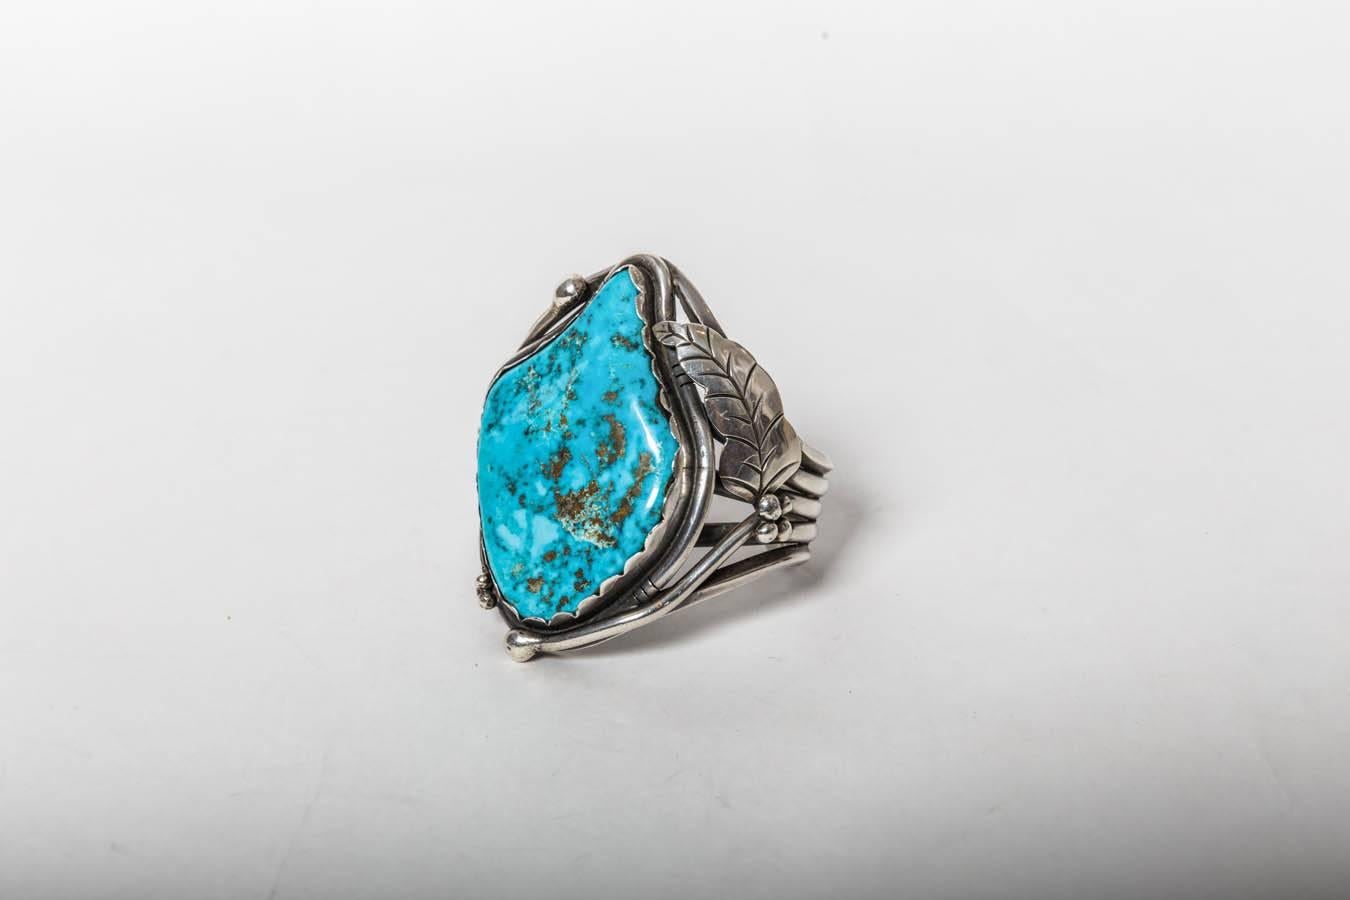 Vintage American Indian Turquoise Cuff 1